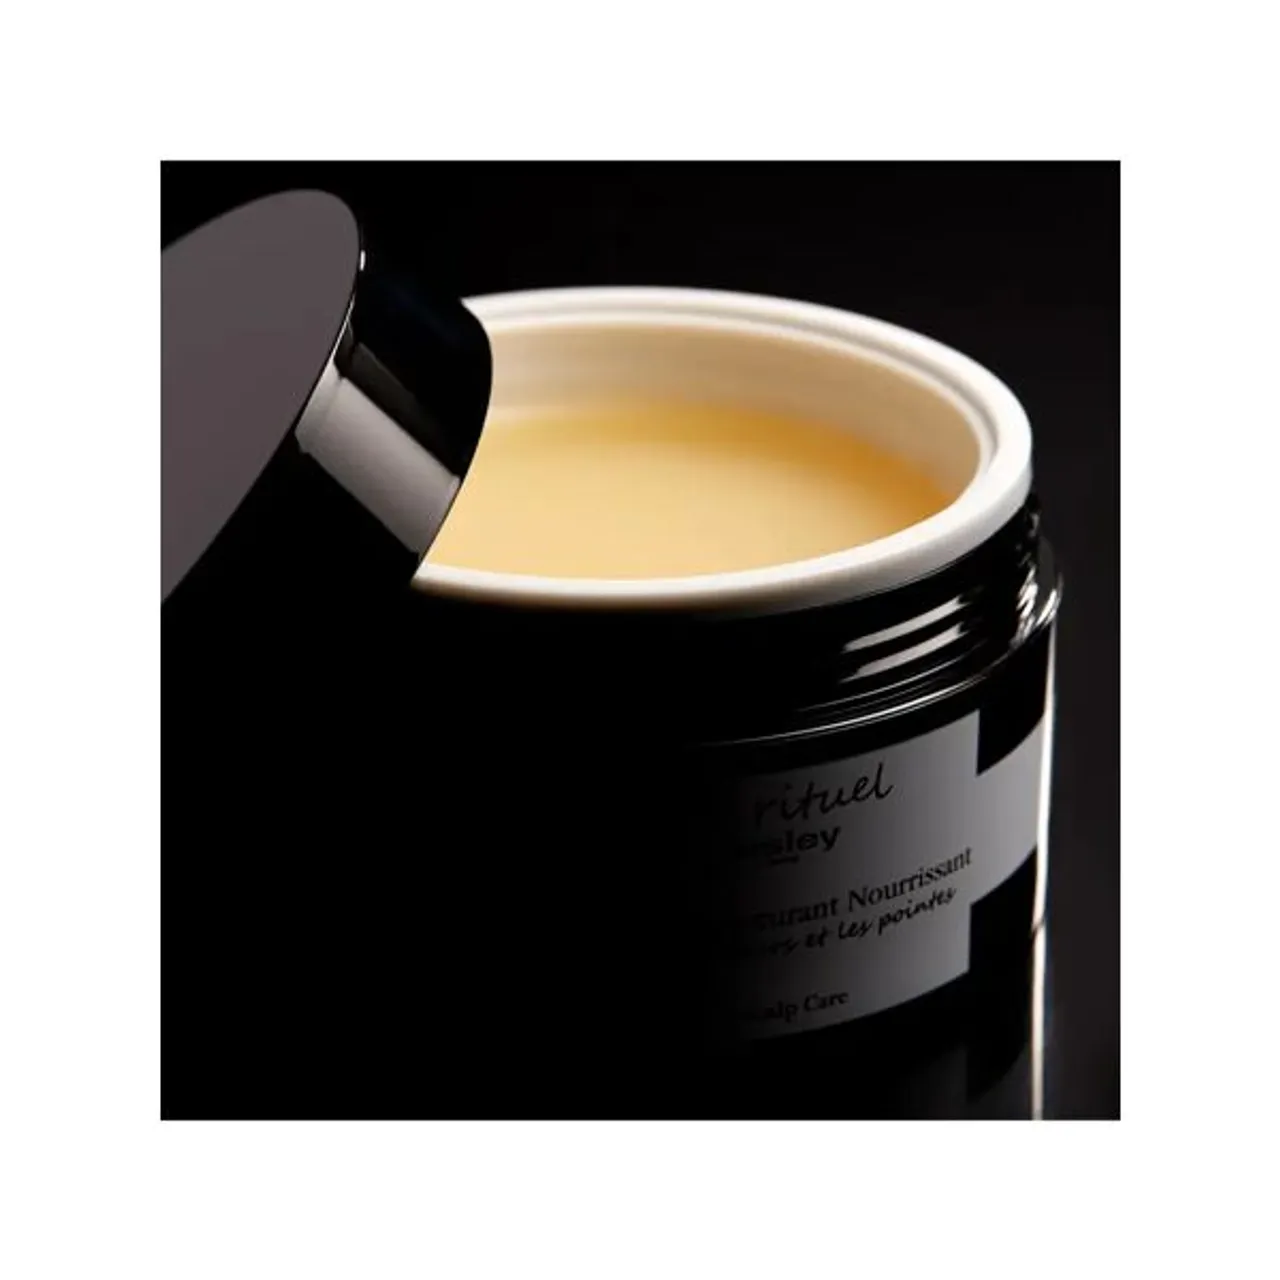 Sisley-Paris Hair Rituel Restructuring Nourishing Balm for Hair Lengths and Ends, 125g - Unisex